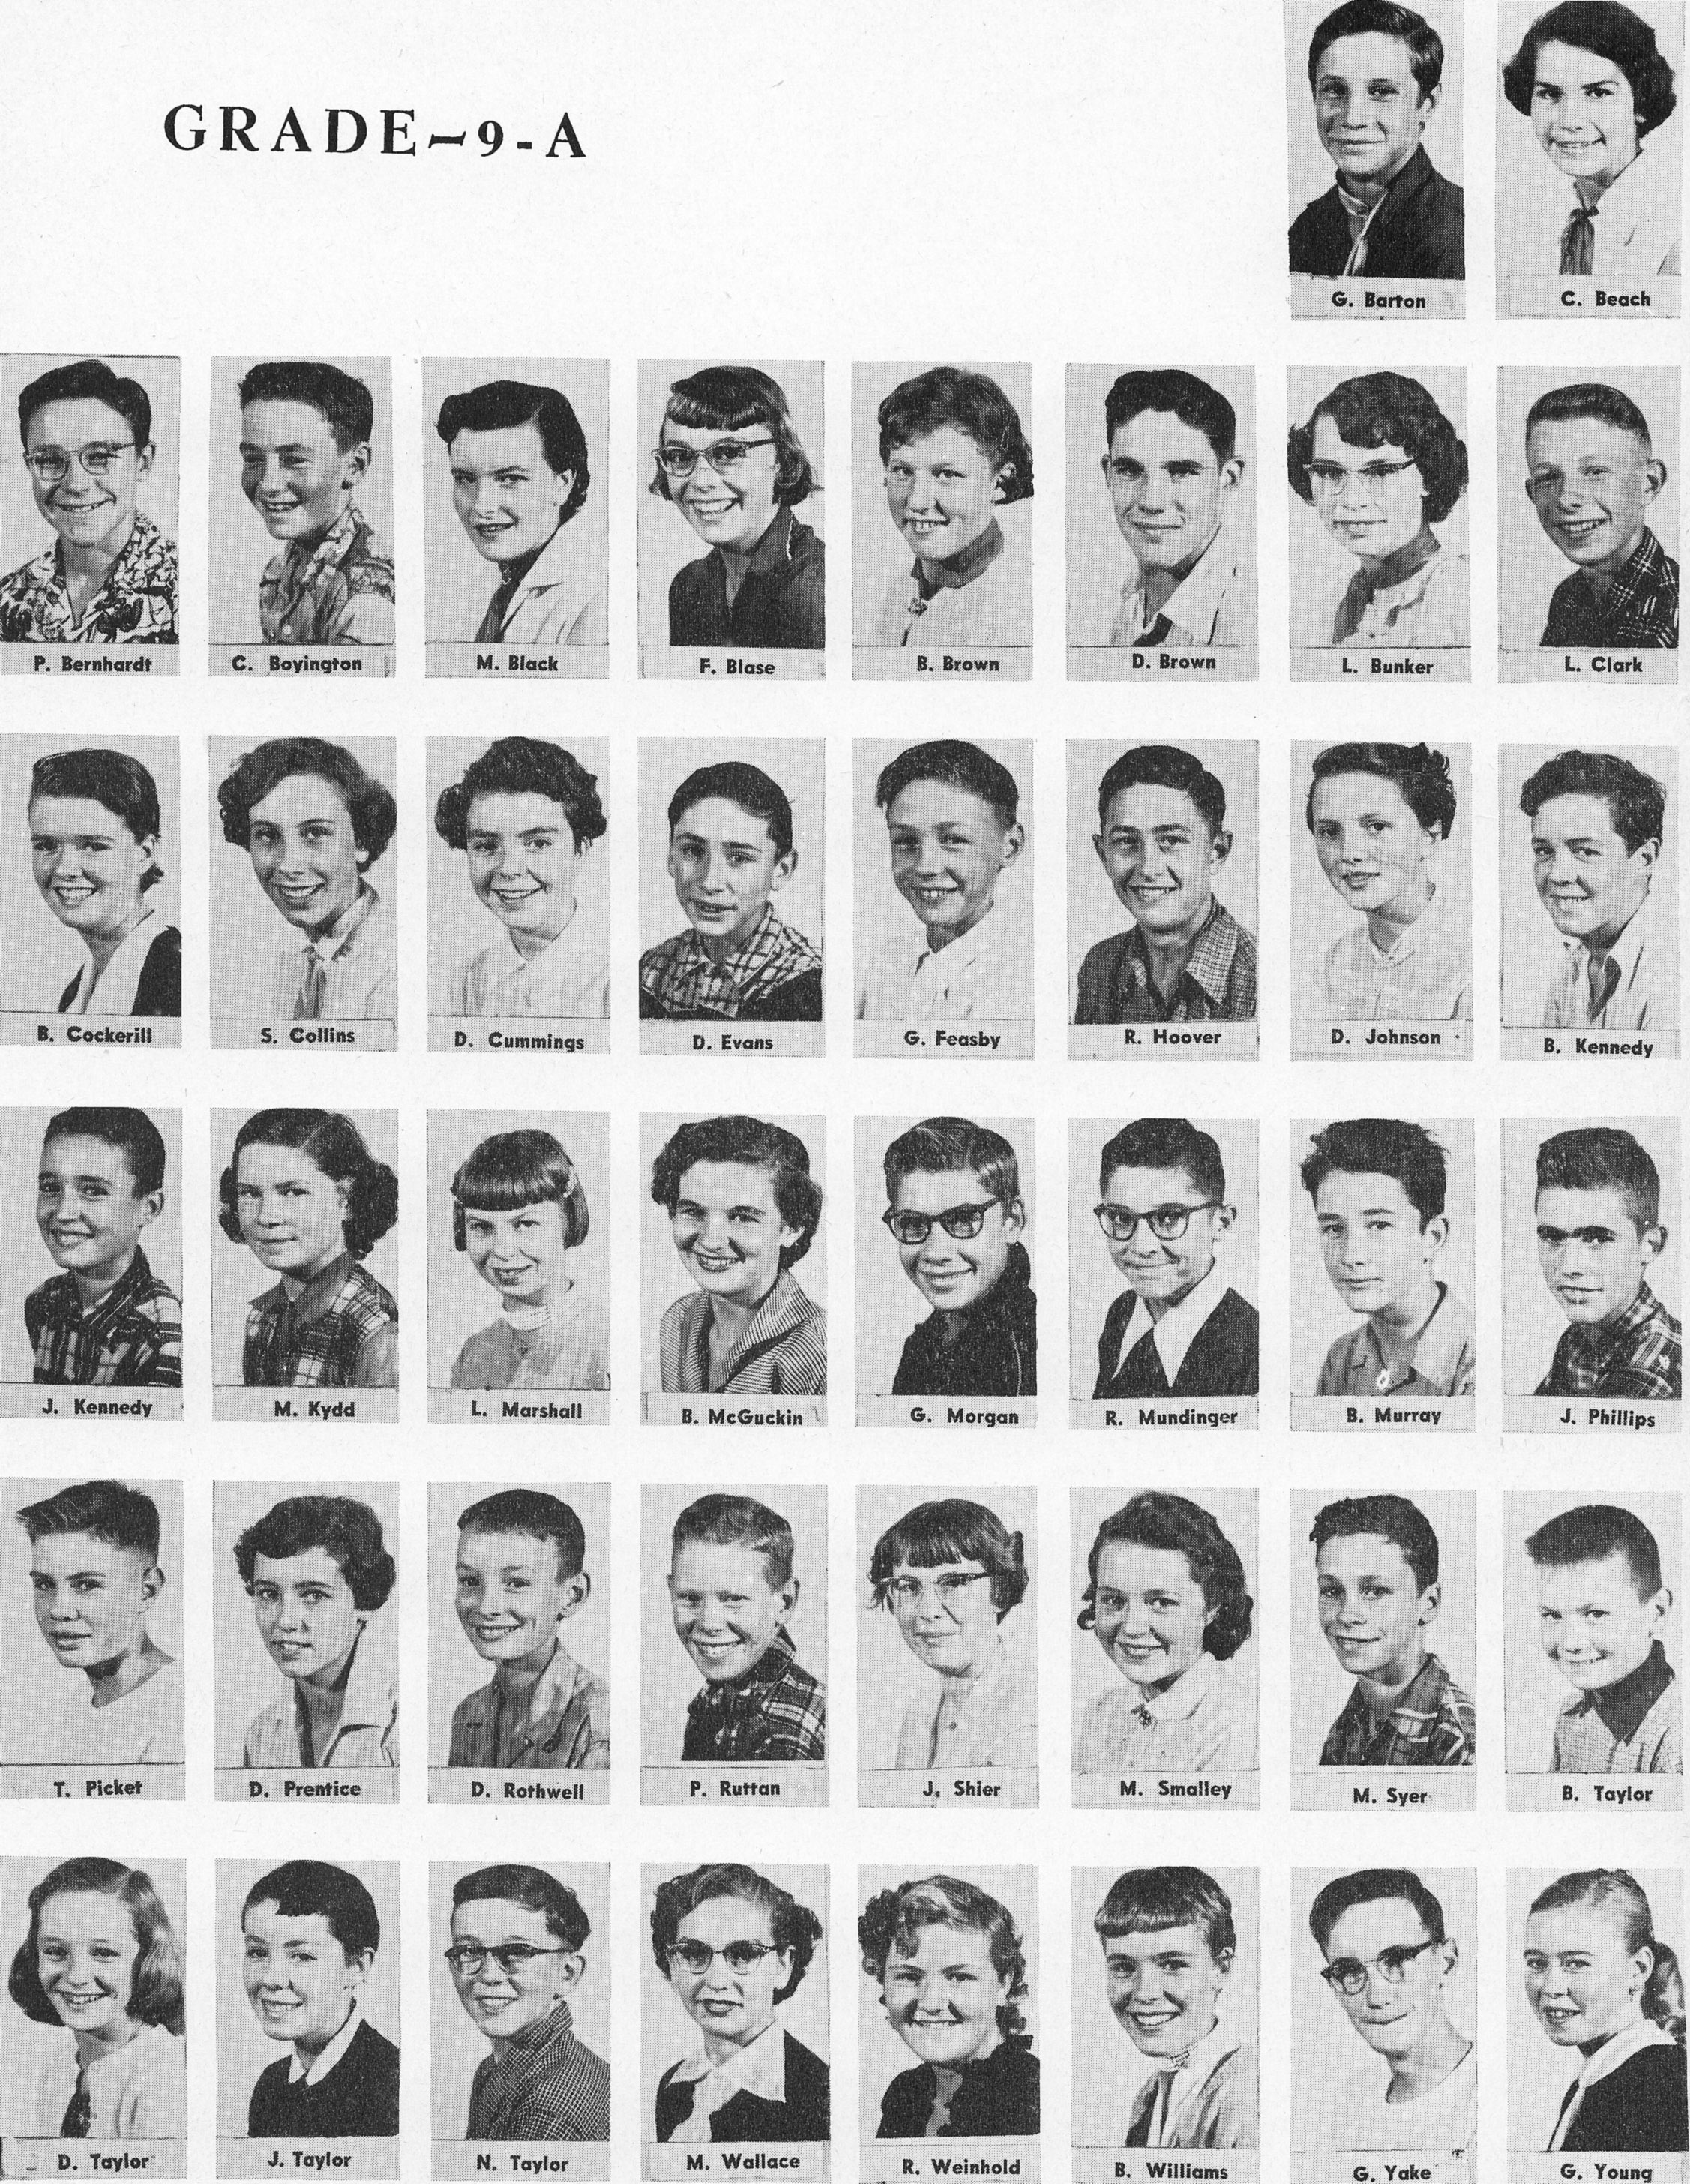 (Click to magnify) Multiple levels of magnification. Names given here to allow Google search. ROW 1: G. Barton, C. Beach; ROW 2: P. Bernhardt, C. Boyington, M. Black, F. Blase, B. Brown, D. Brown, L. Bunker, L. Clark; ROW 3: B. Cockerill, S. Collins, D. C